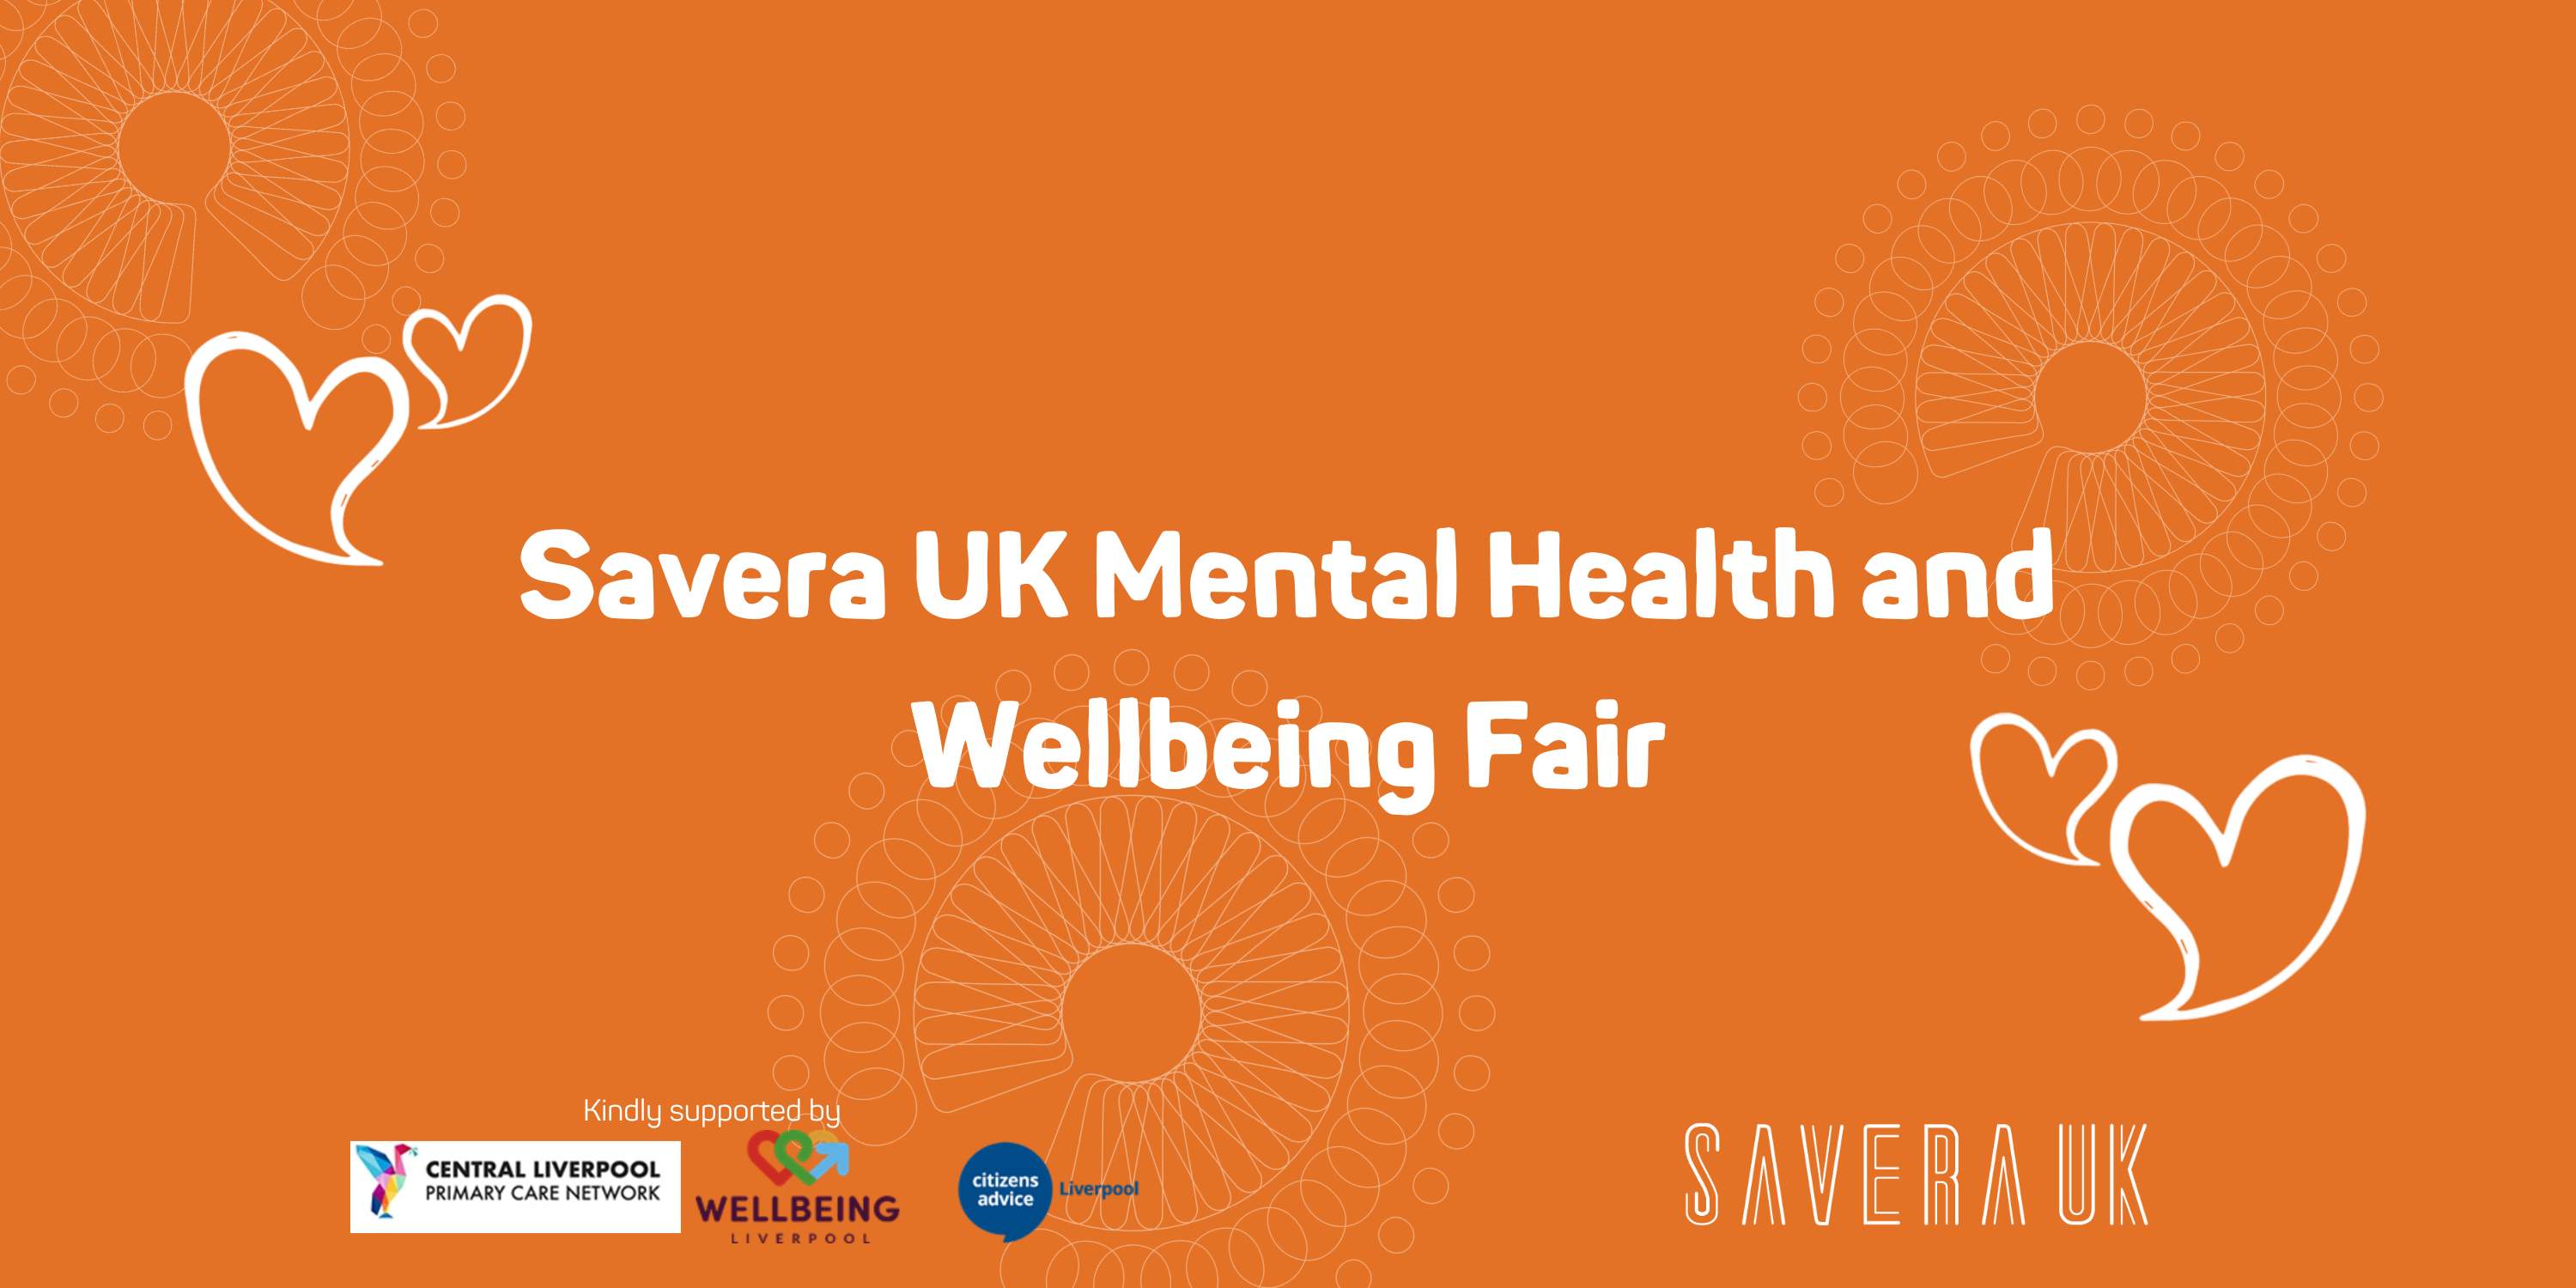 Test reads Savera UK Mental Health and Wellbeing Fair against an orange background